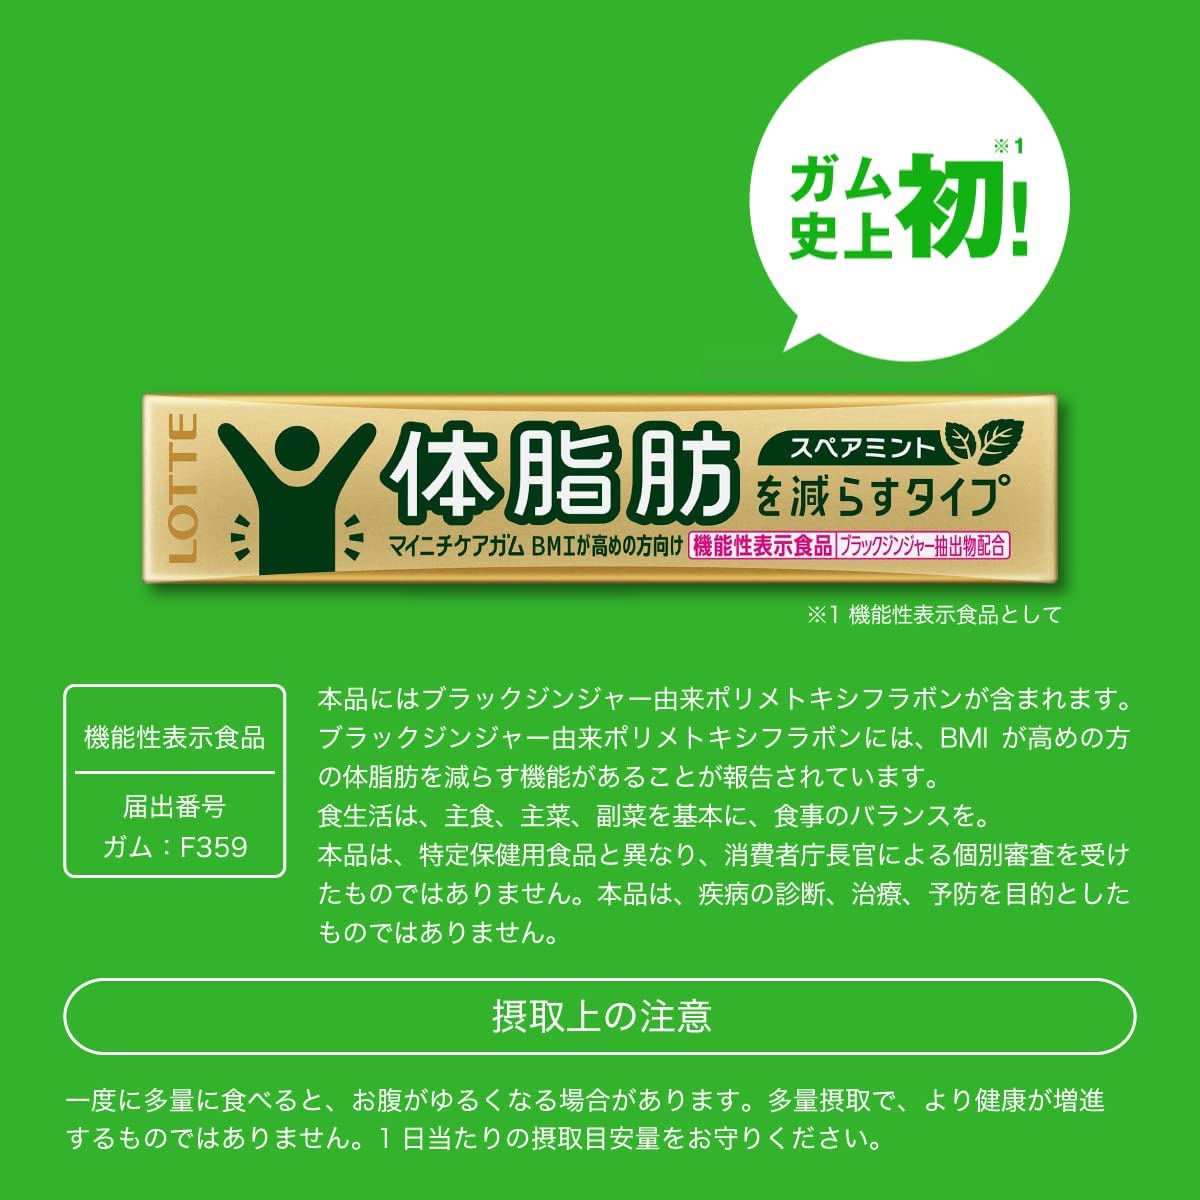 Lotte Mainichi Care Gum Slimming - buy online from Japan